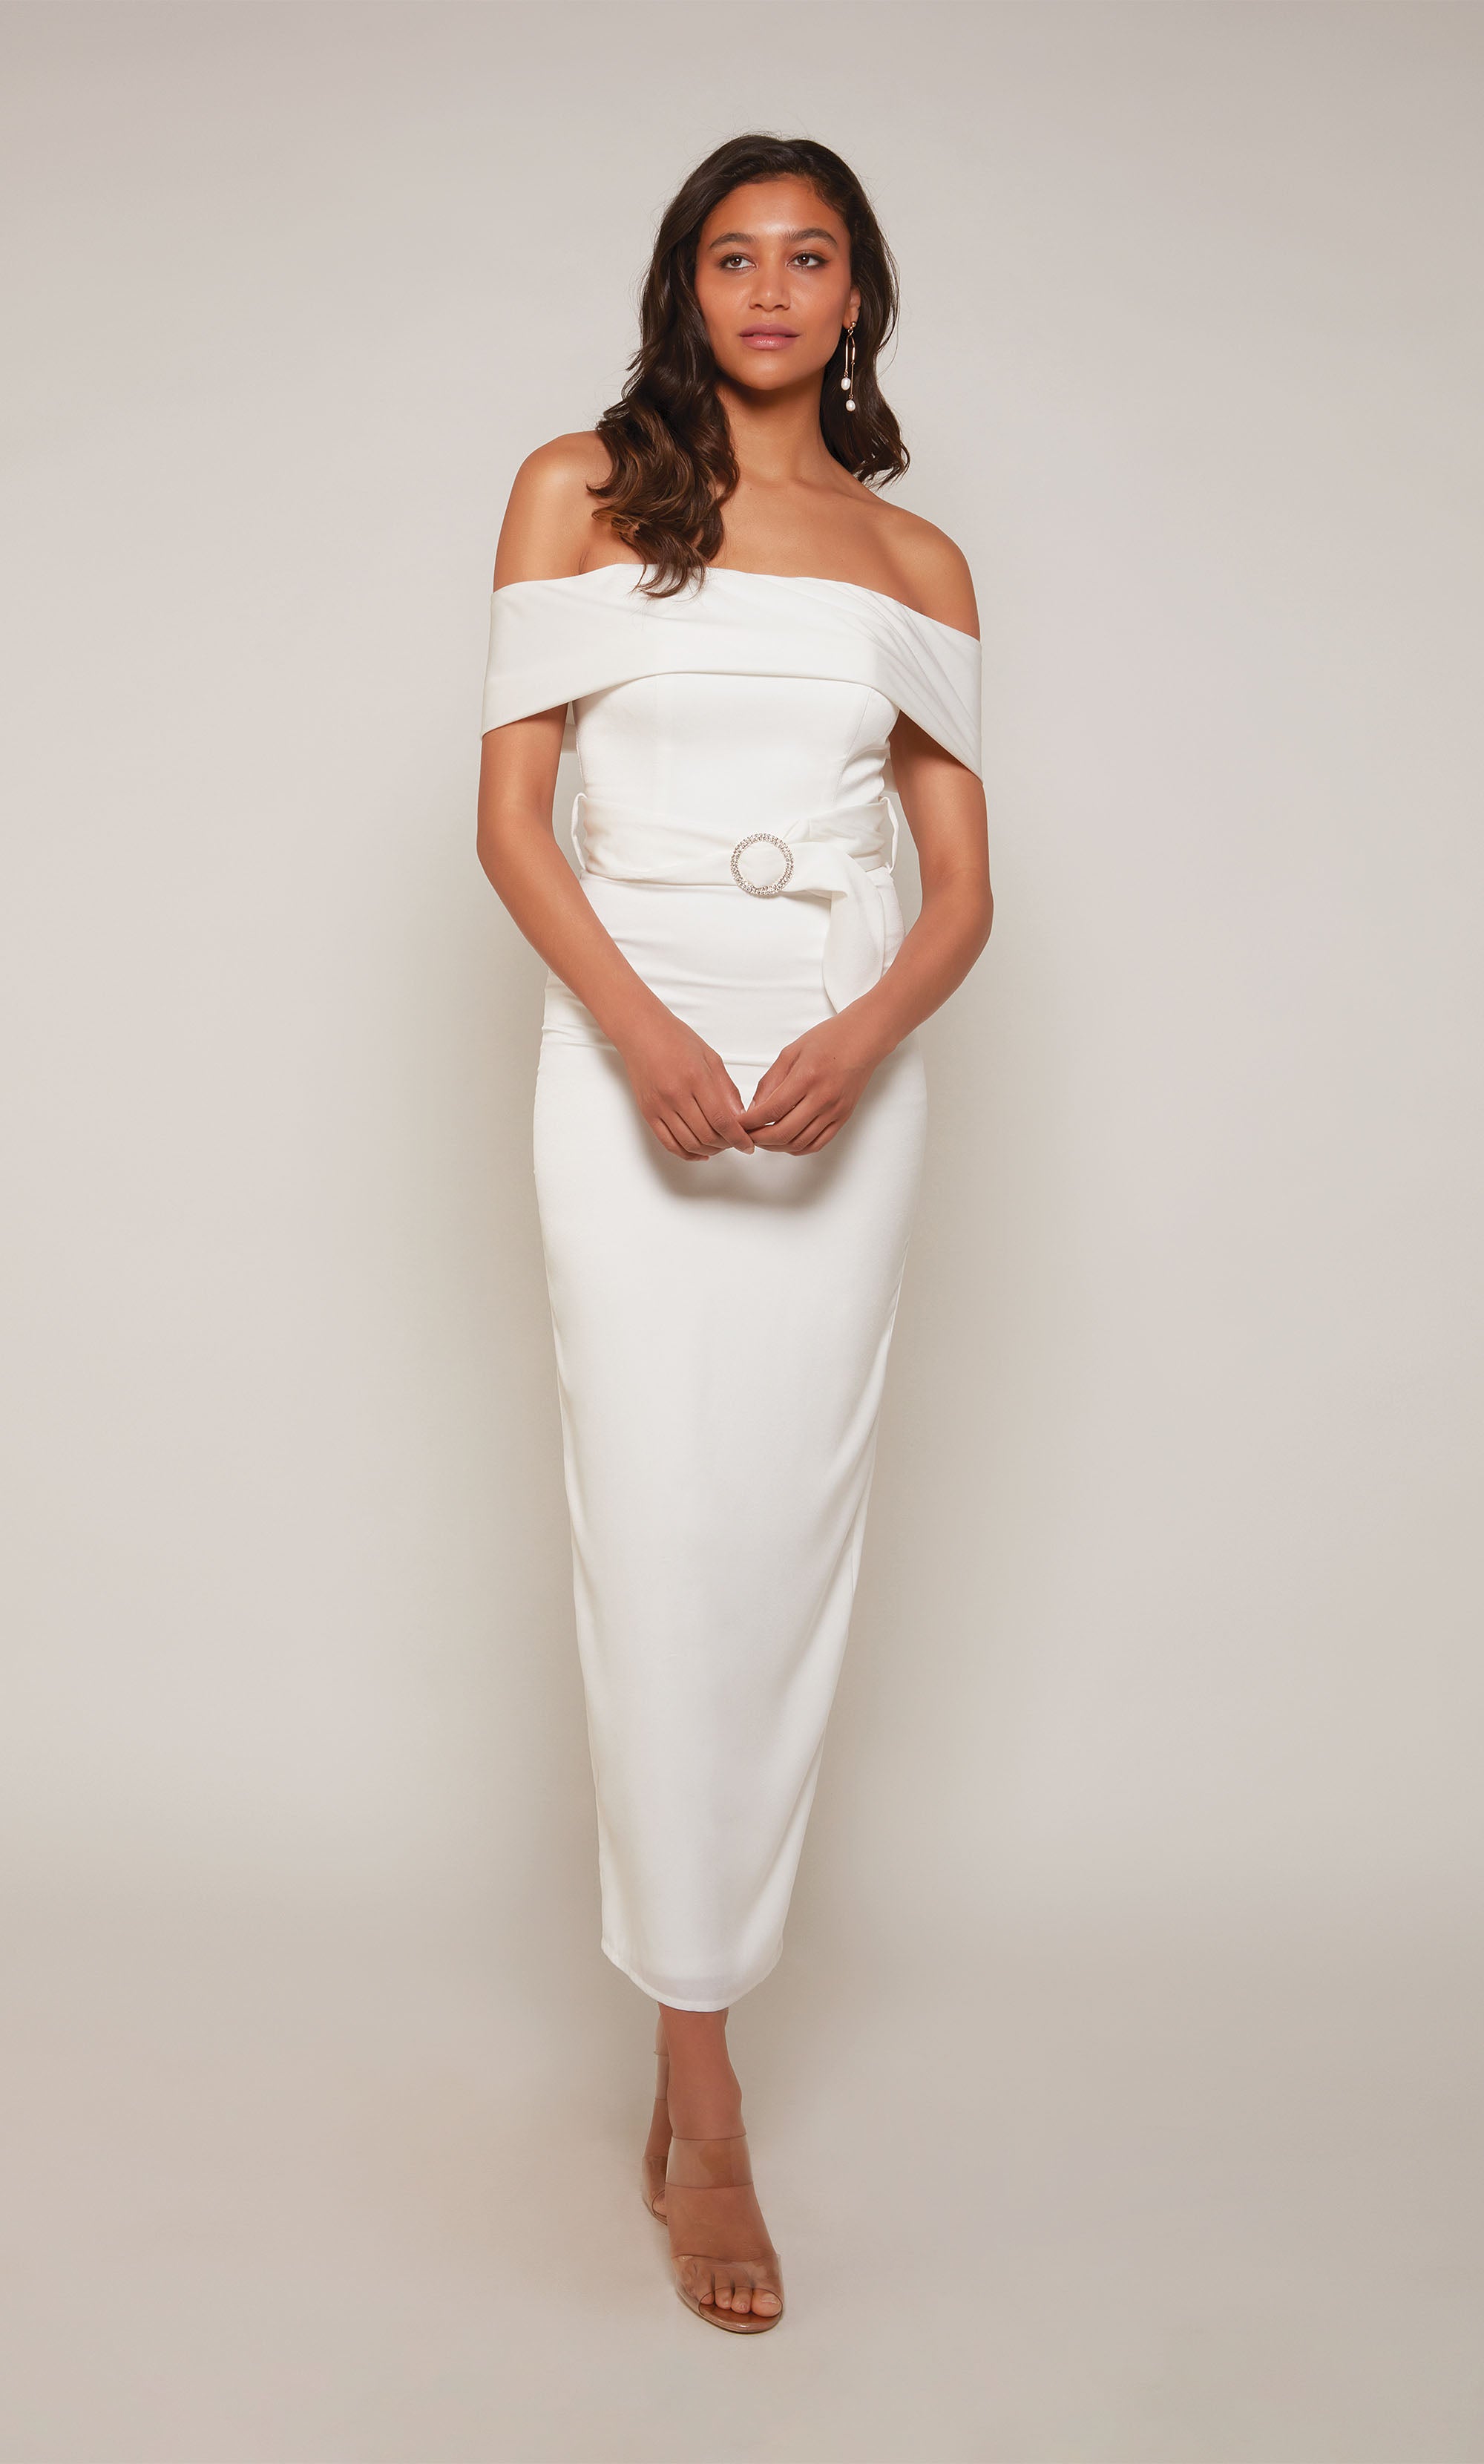 A  white, satin midi dress with an off the shoulder neckline and thick belt at the waistline. The skirt is a fitted pencil skirt with a back slit.